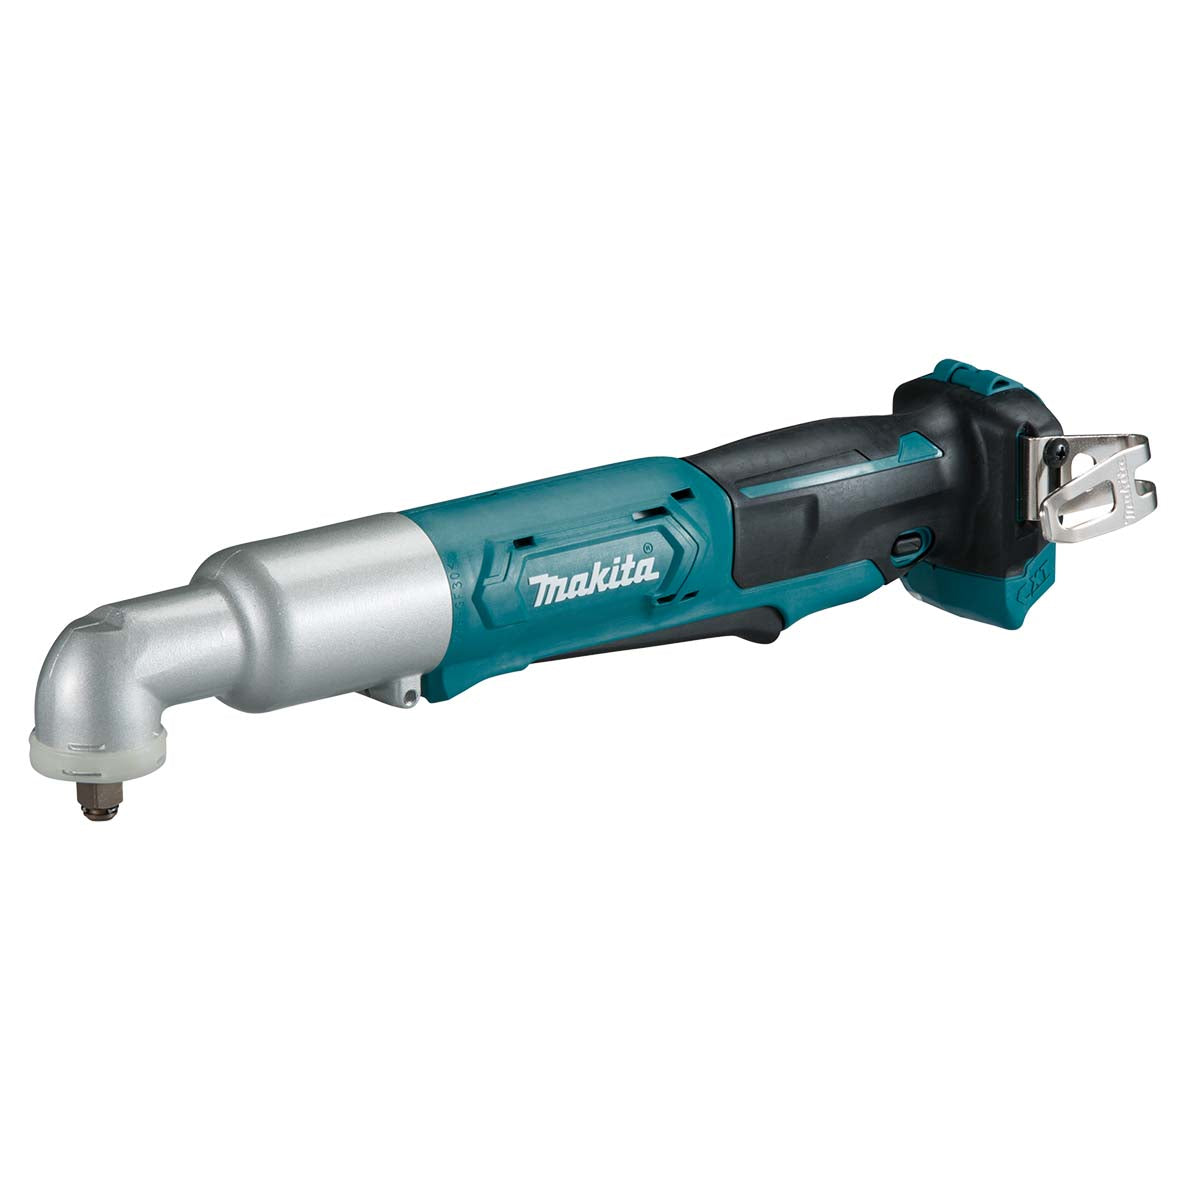 12V Angled 3/8" Impact Driver Bare (Tool Only) TL065DZ by Makita